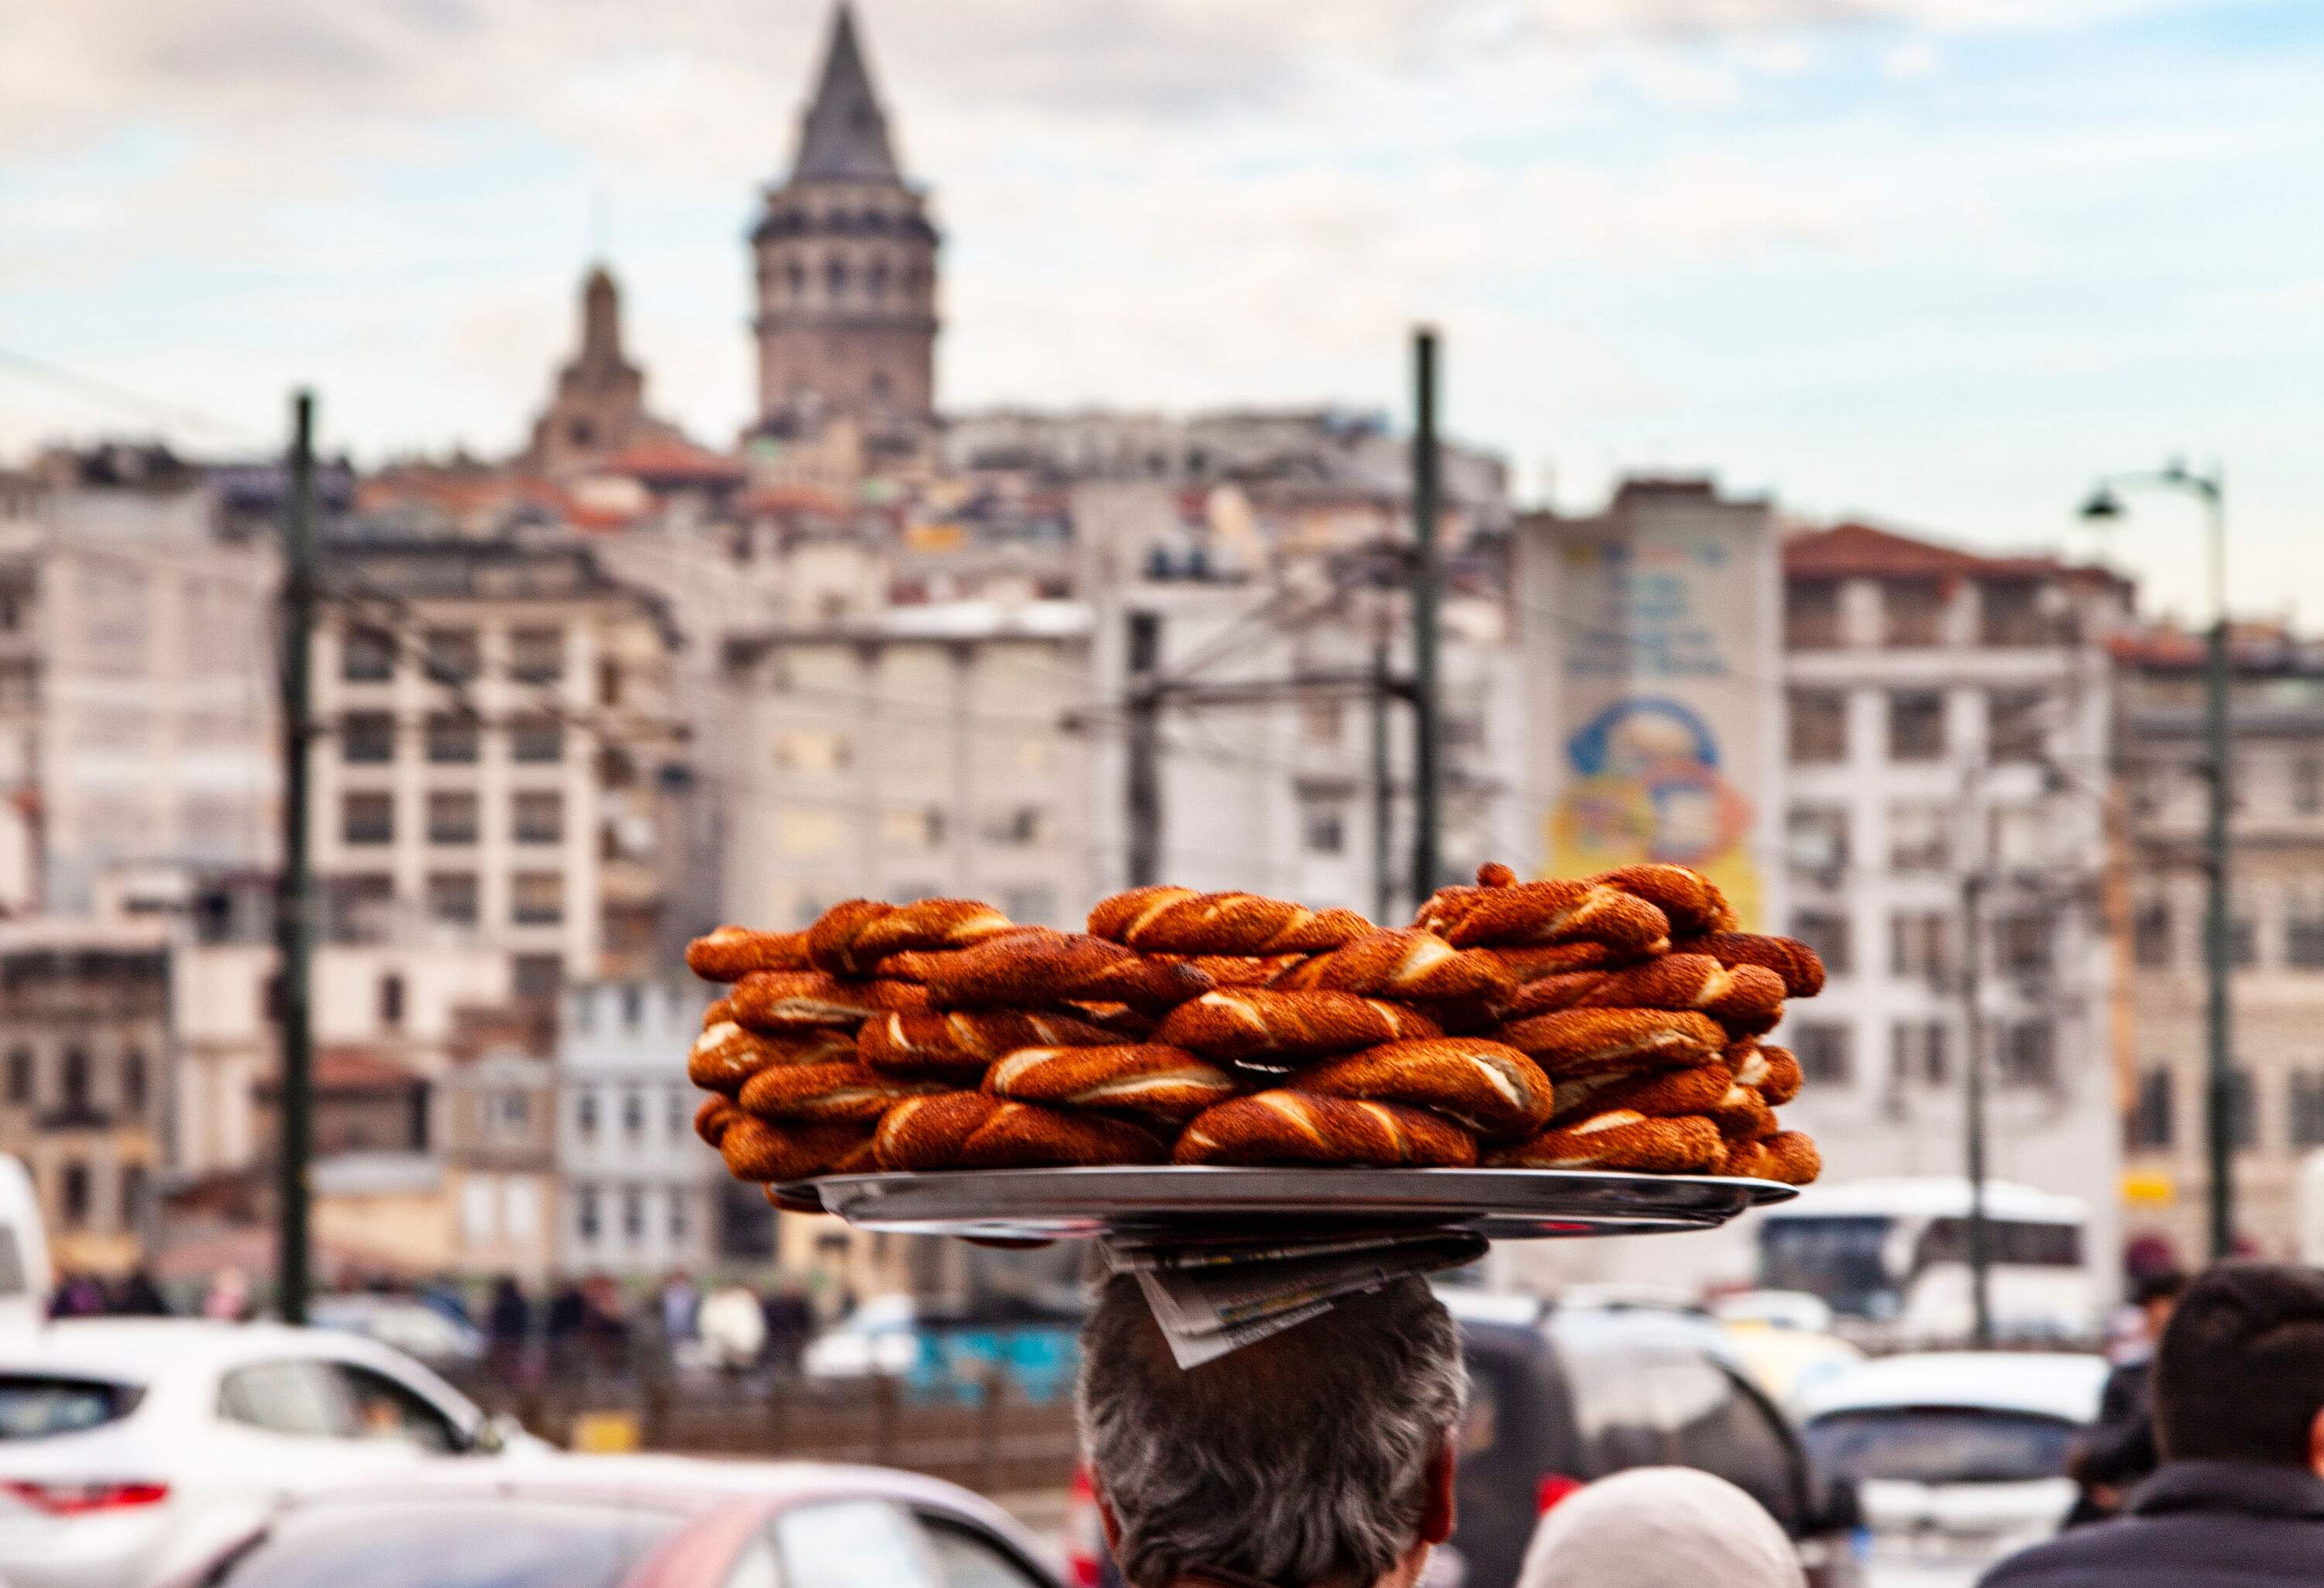 A man skillfully balances a large tray of pastries on his head as he confidently walks along a bustling pedestrian road. 